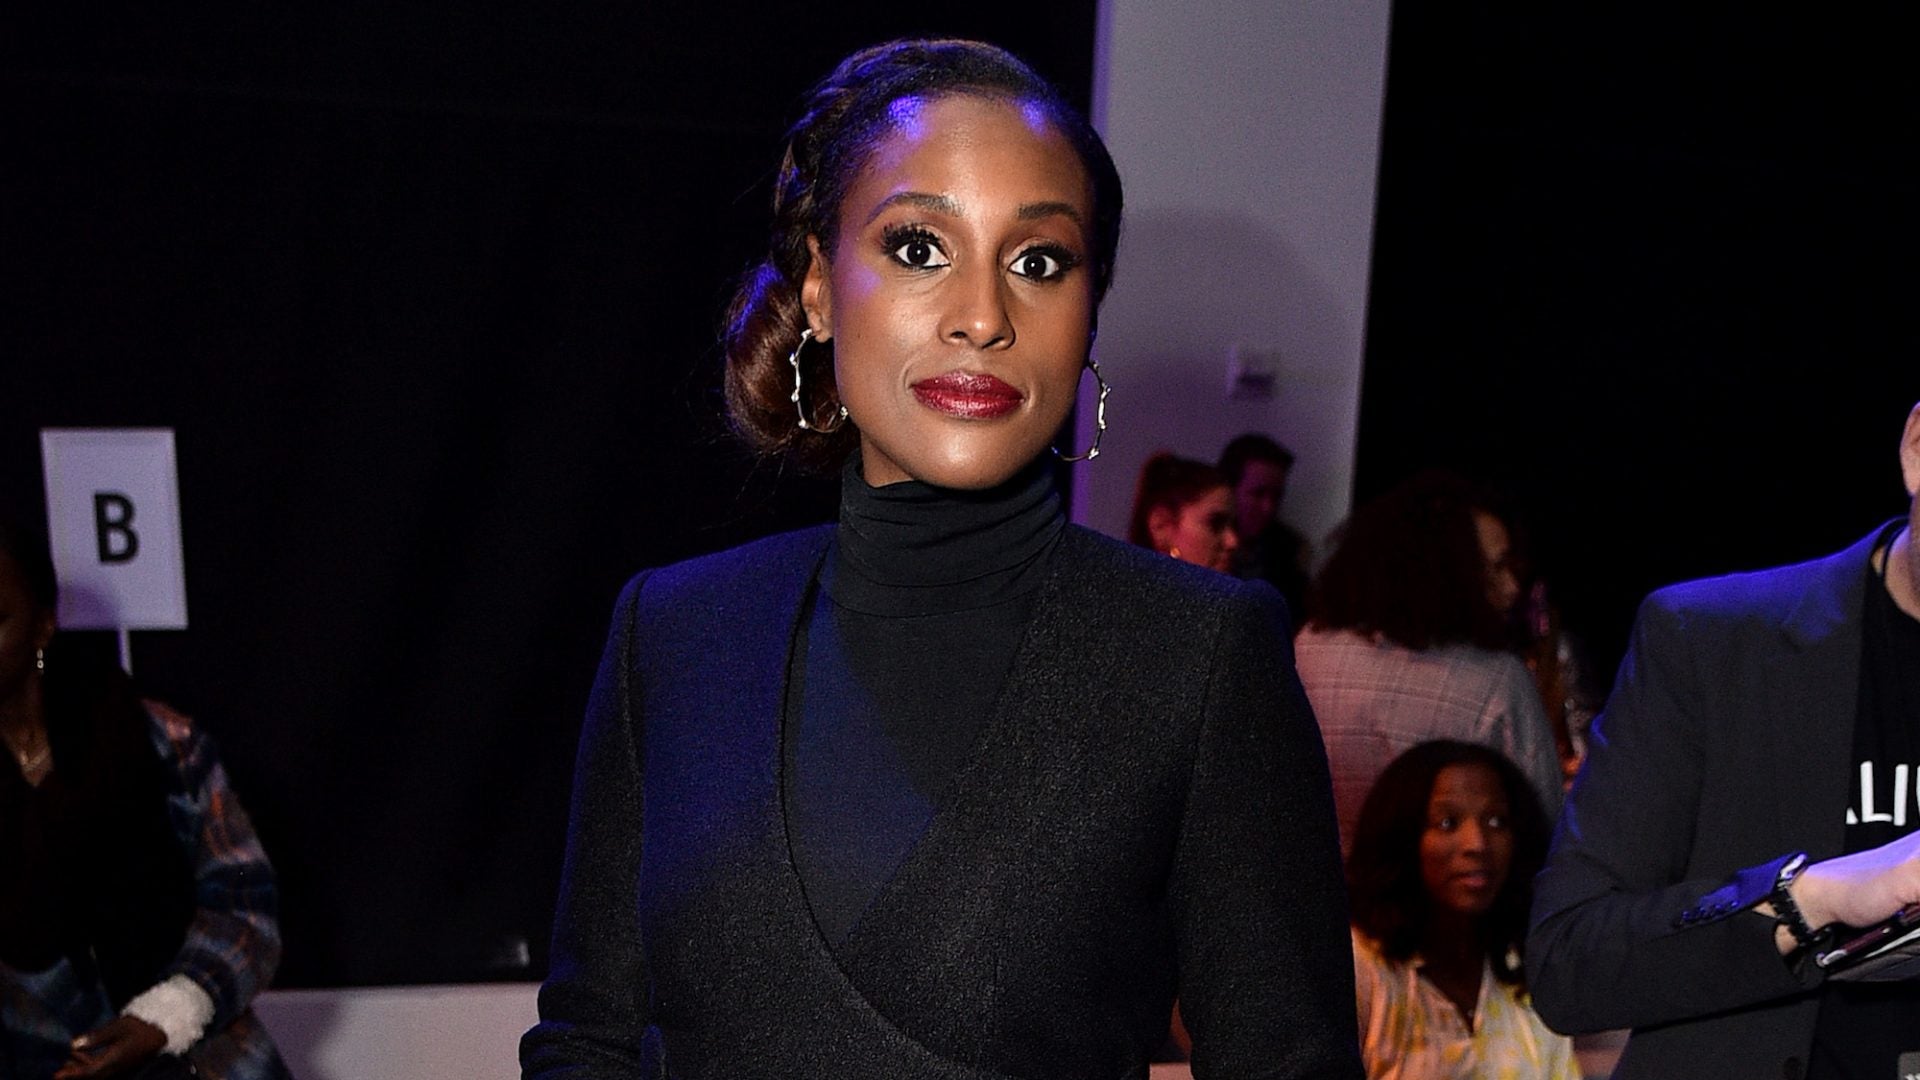 Issa Rae's New Record Label Creates A Playlist For The Runway